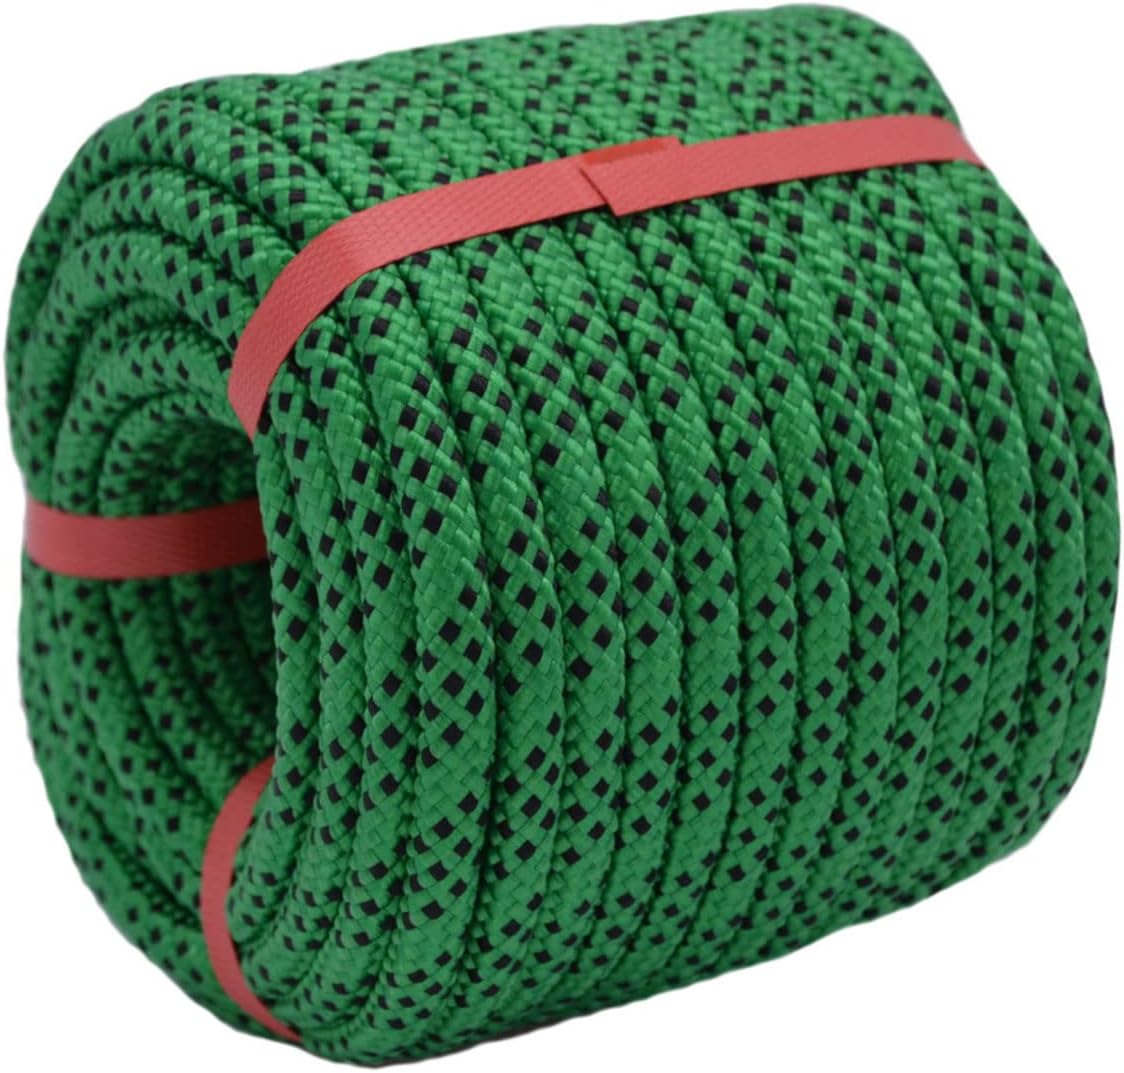 YuzeNet Braided Polyester Arborist Rigging Rope (3/8" X 100') Strong Pulling Rope for Climbing Sailing Camping Swings,Green/Black